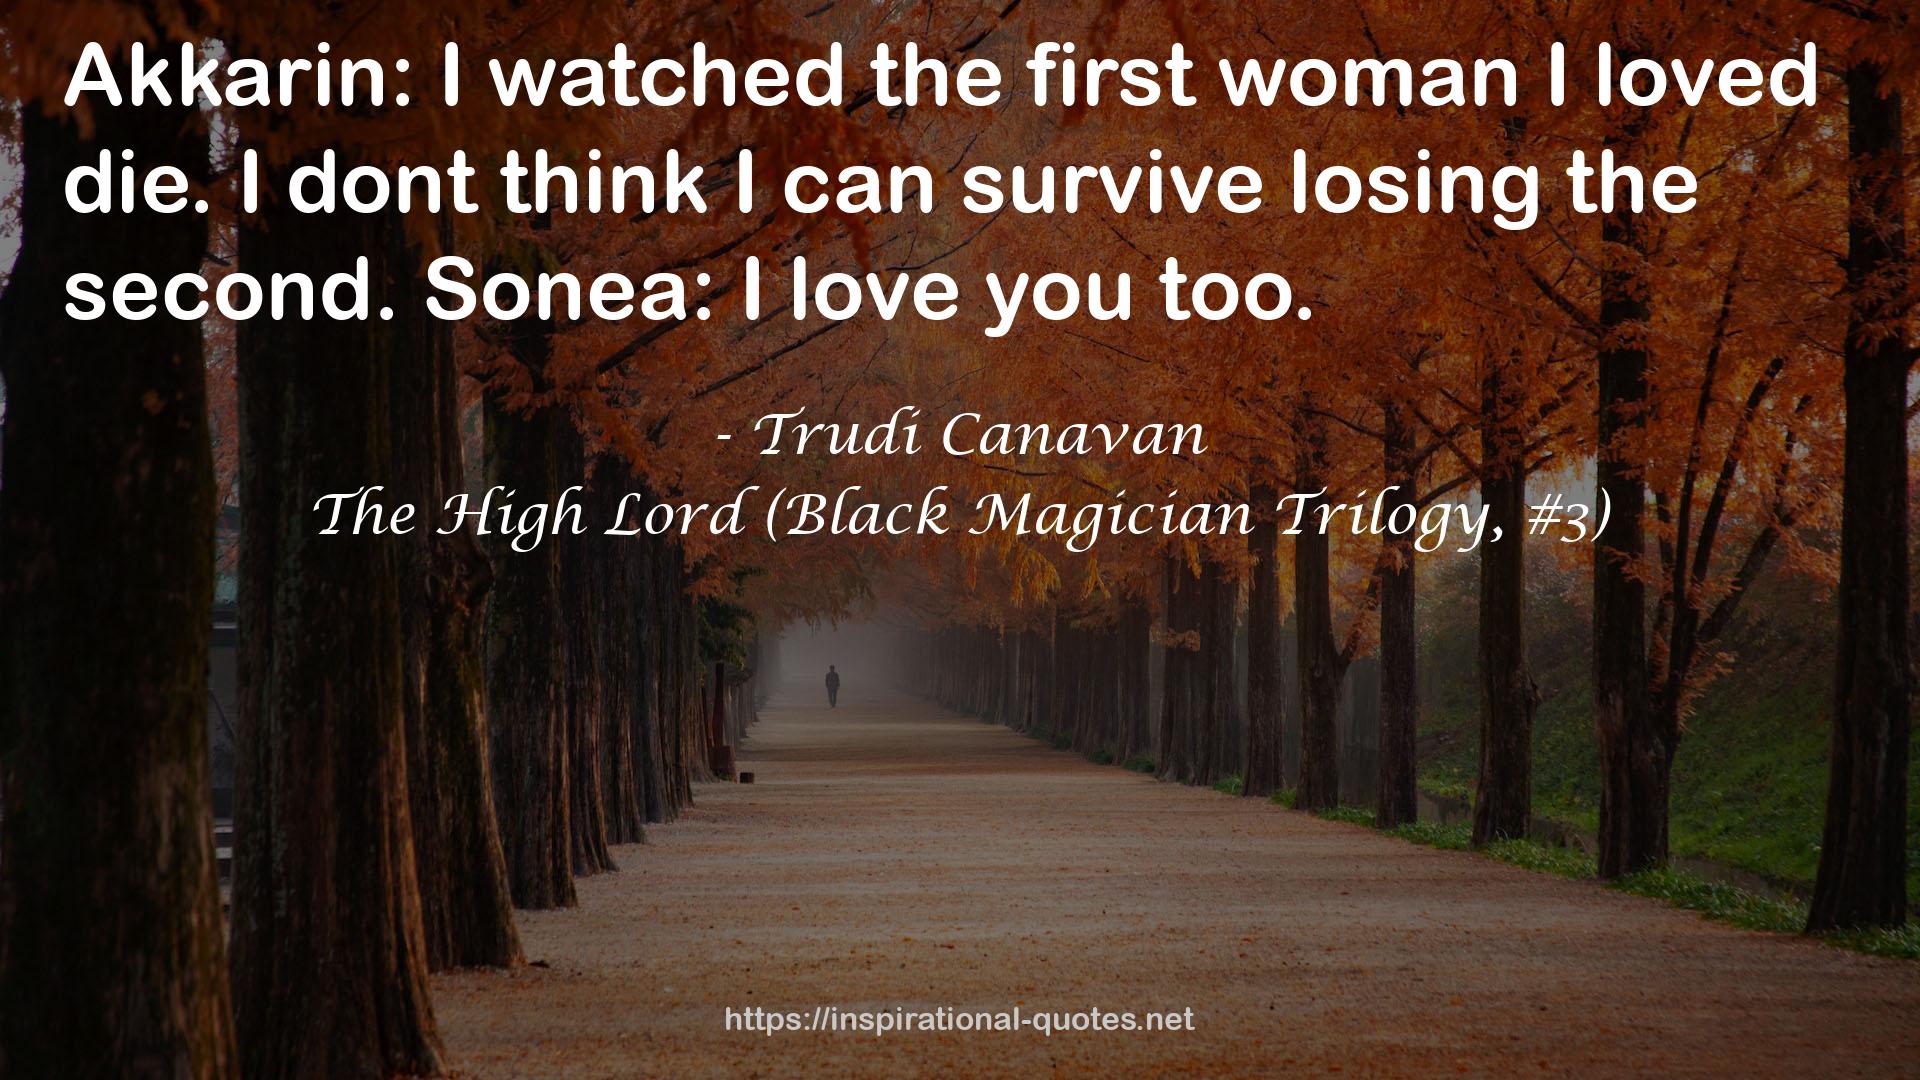 The High Lord (Black Magician Trilogy, #3) QUOTES